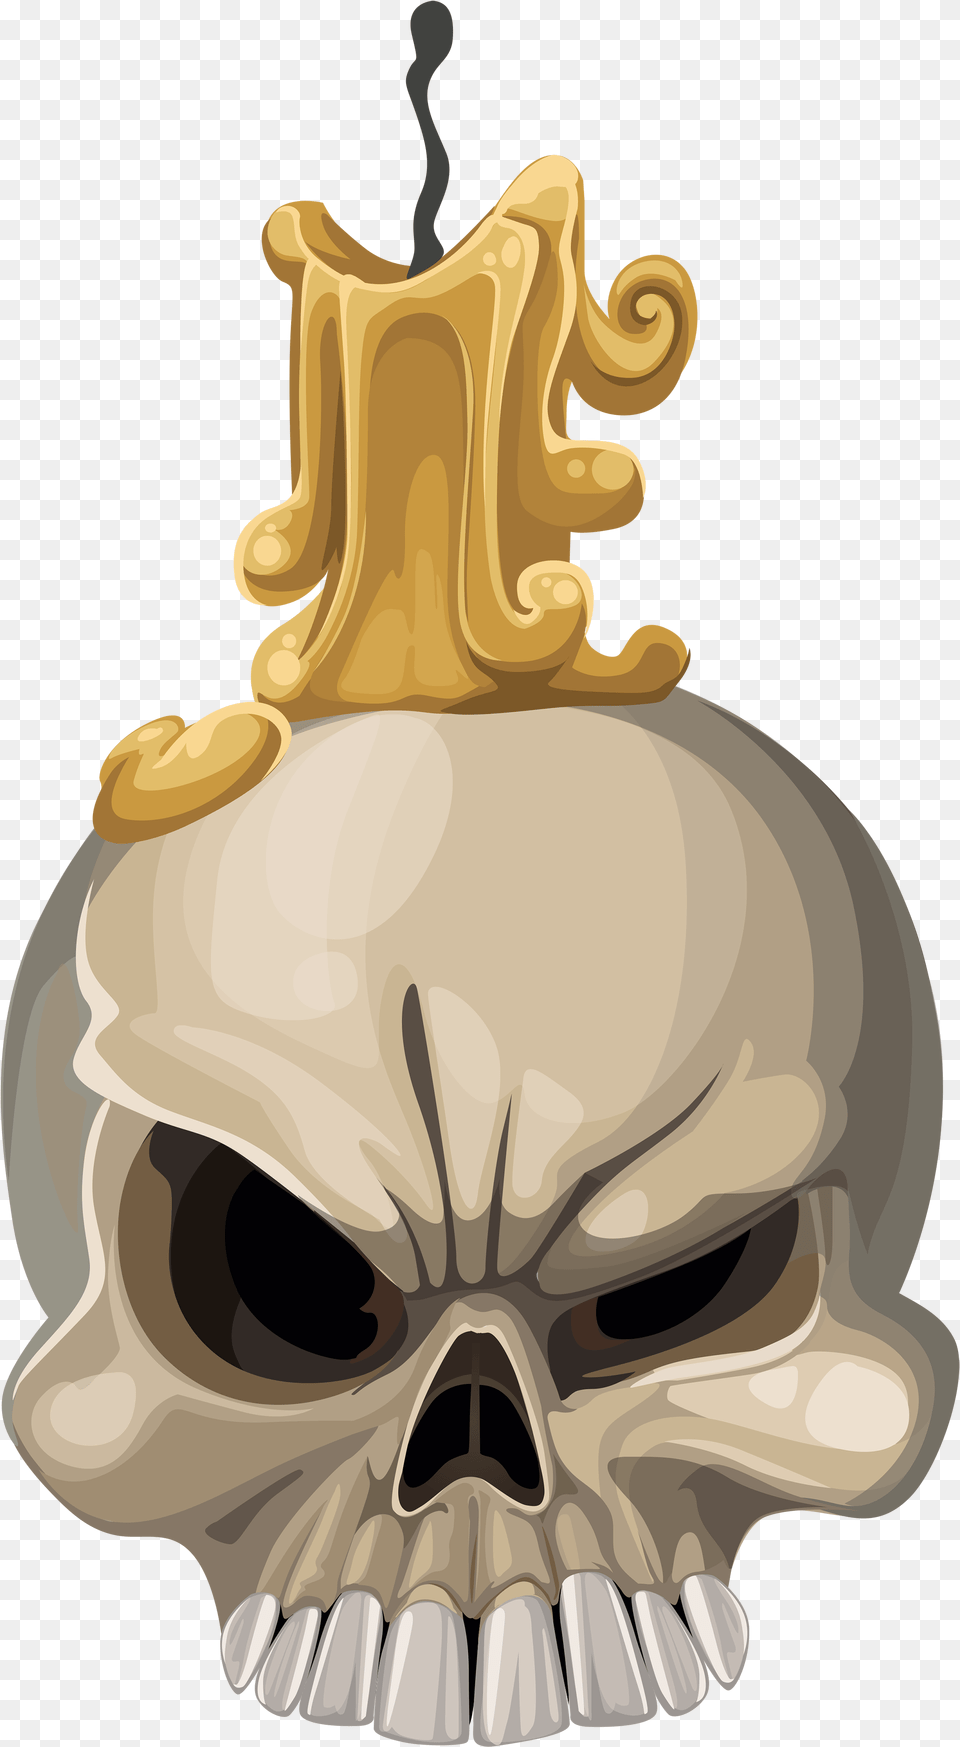 Skull With Candle, Accessories Png Image